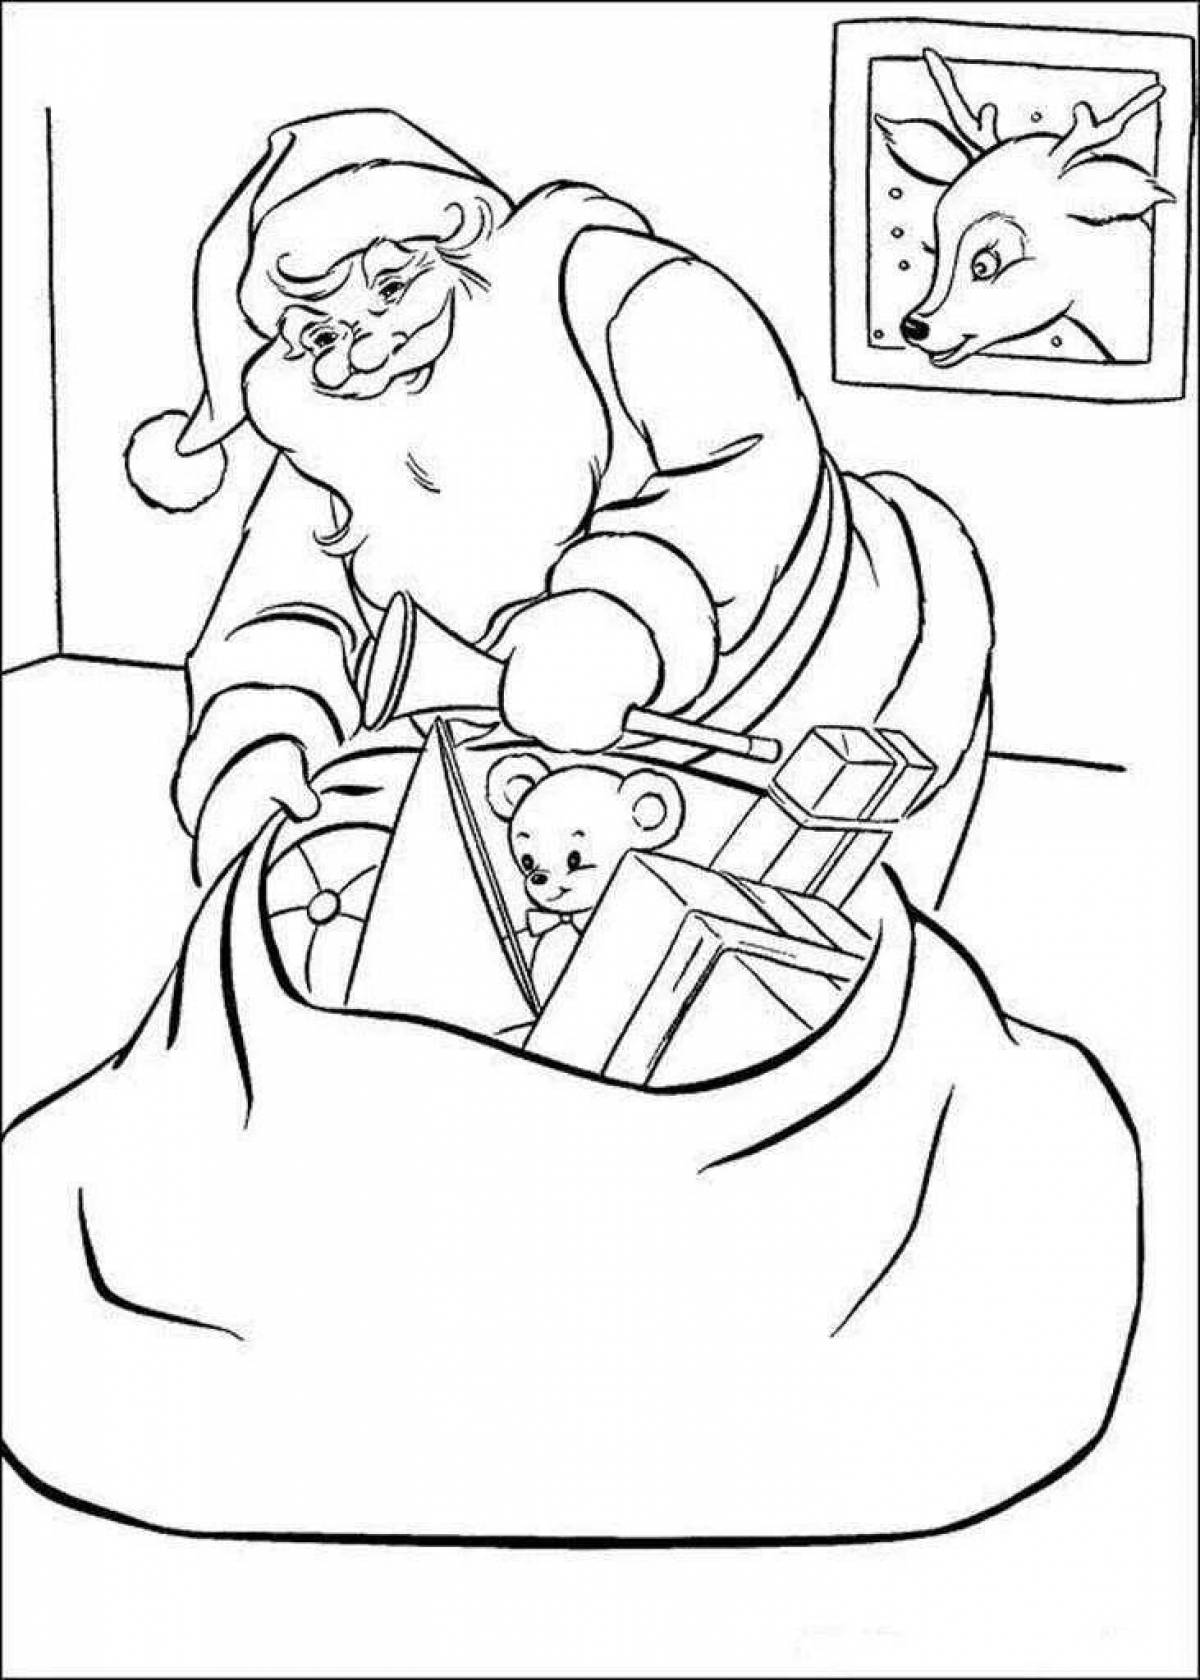 Coloring book cheerful Santa Claus with a bag